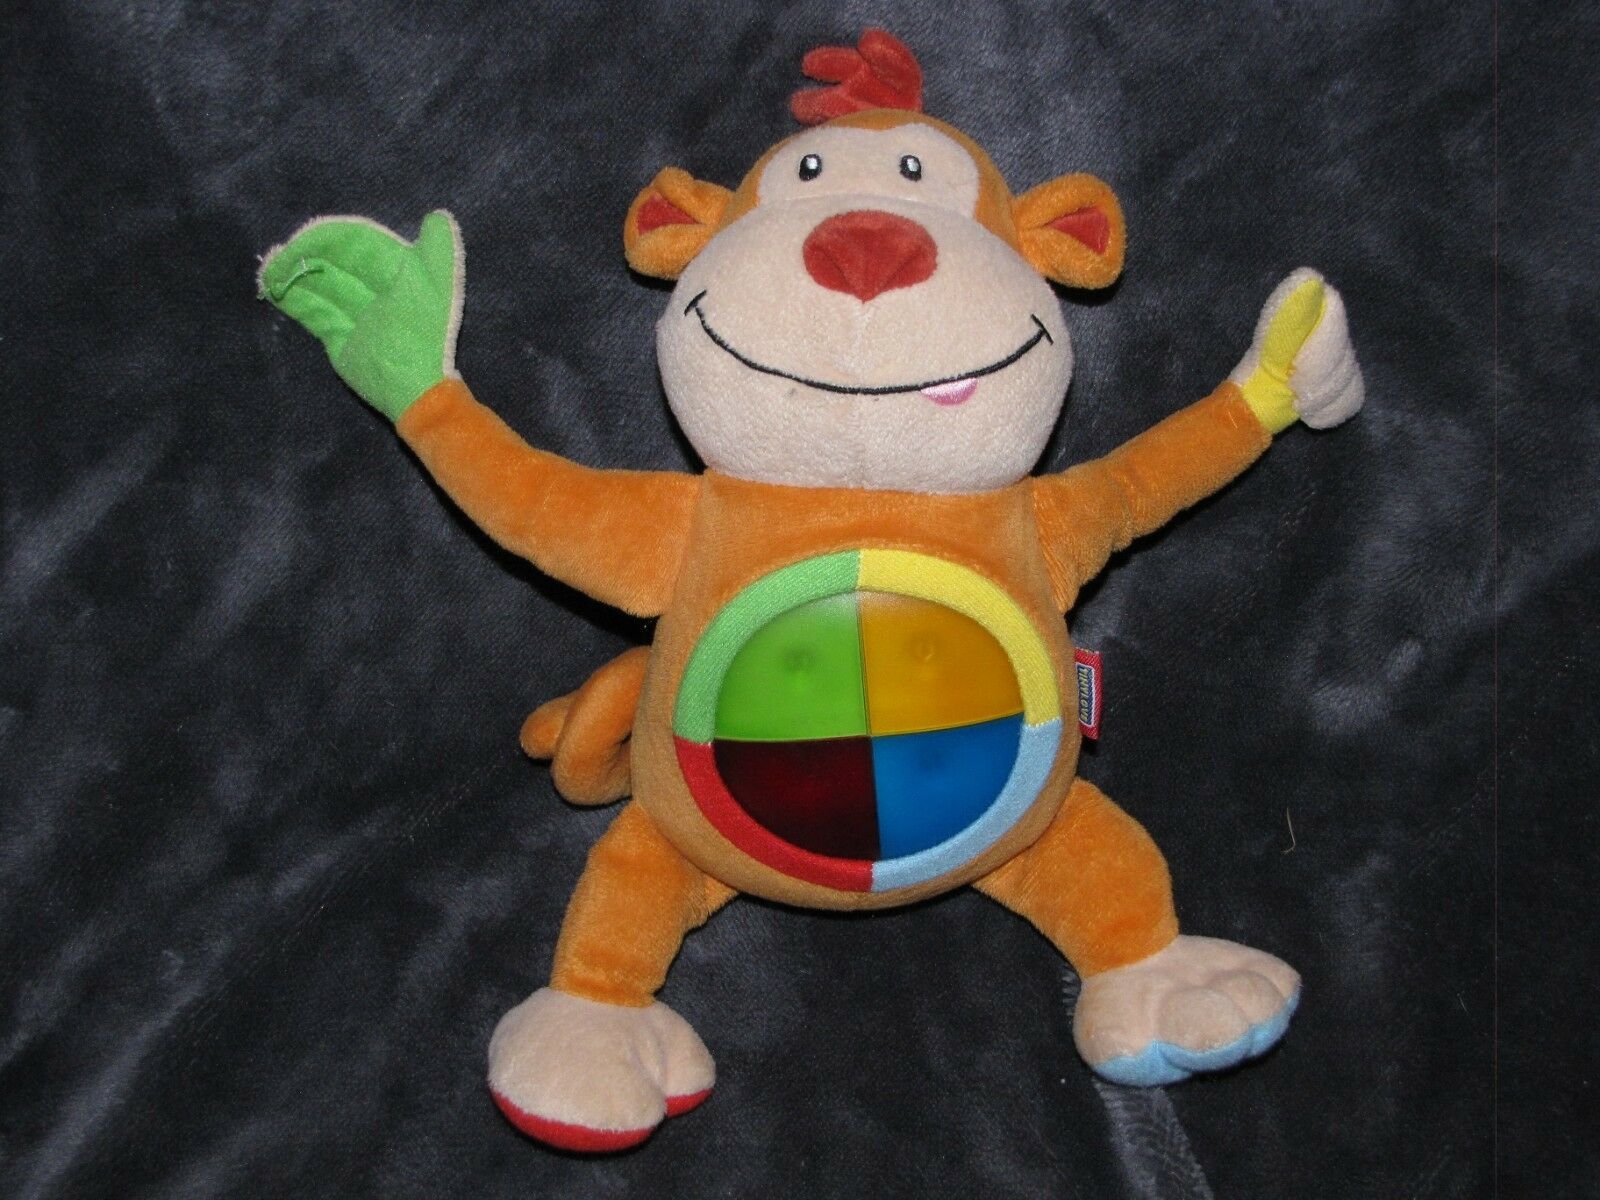 TINY LOVE MONKEY STUFFED PLUSH BABY INFANT TOY MOTION ACTIVATED MUSIC LIGHTS - $26.72